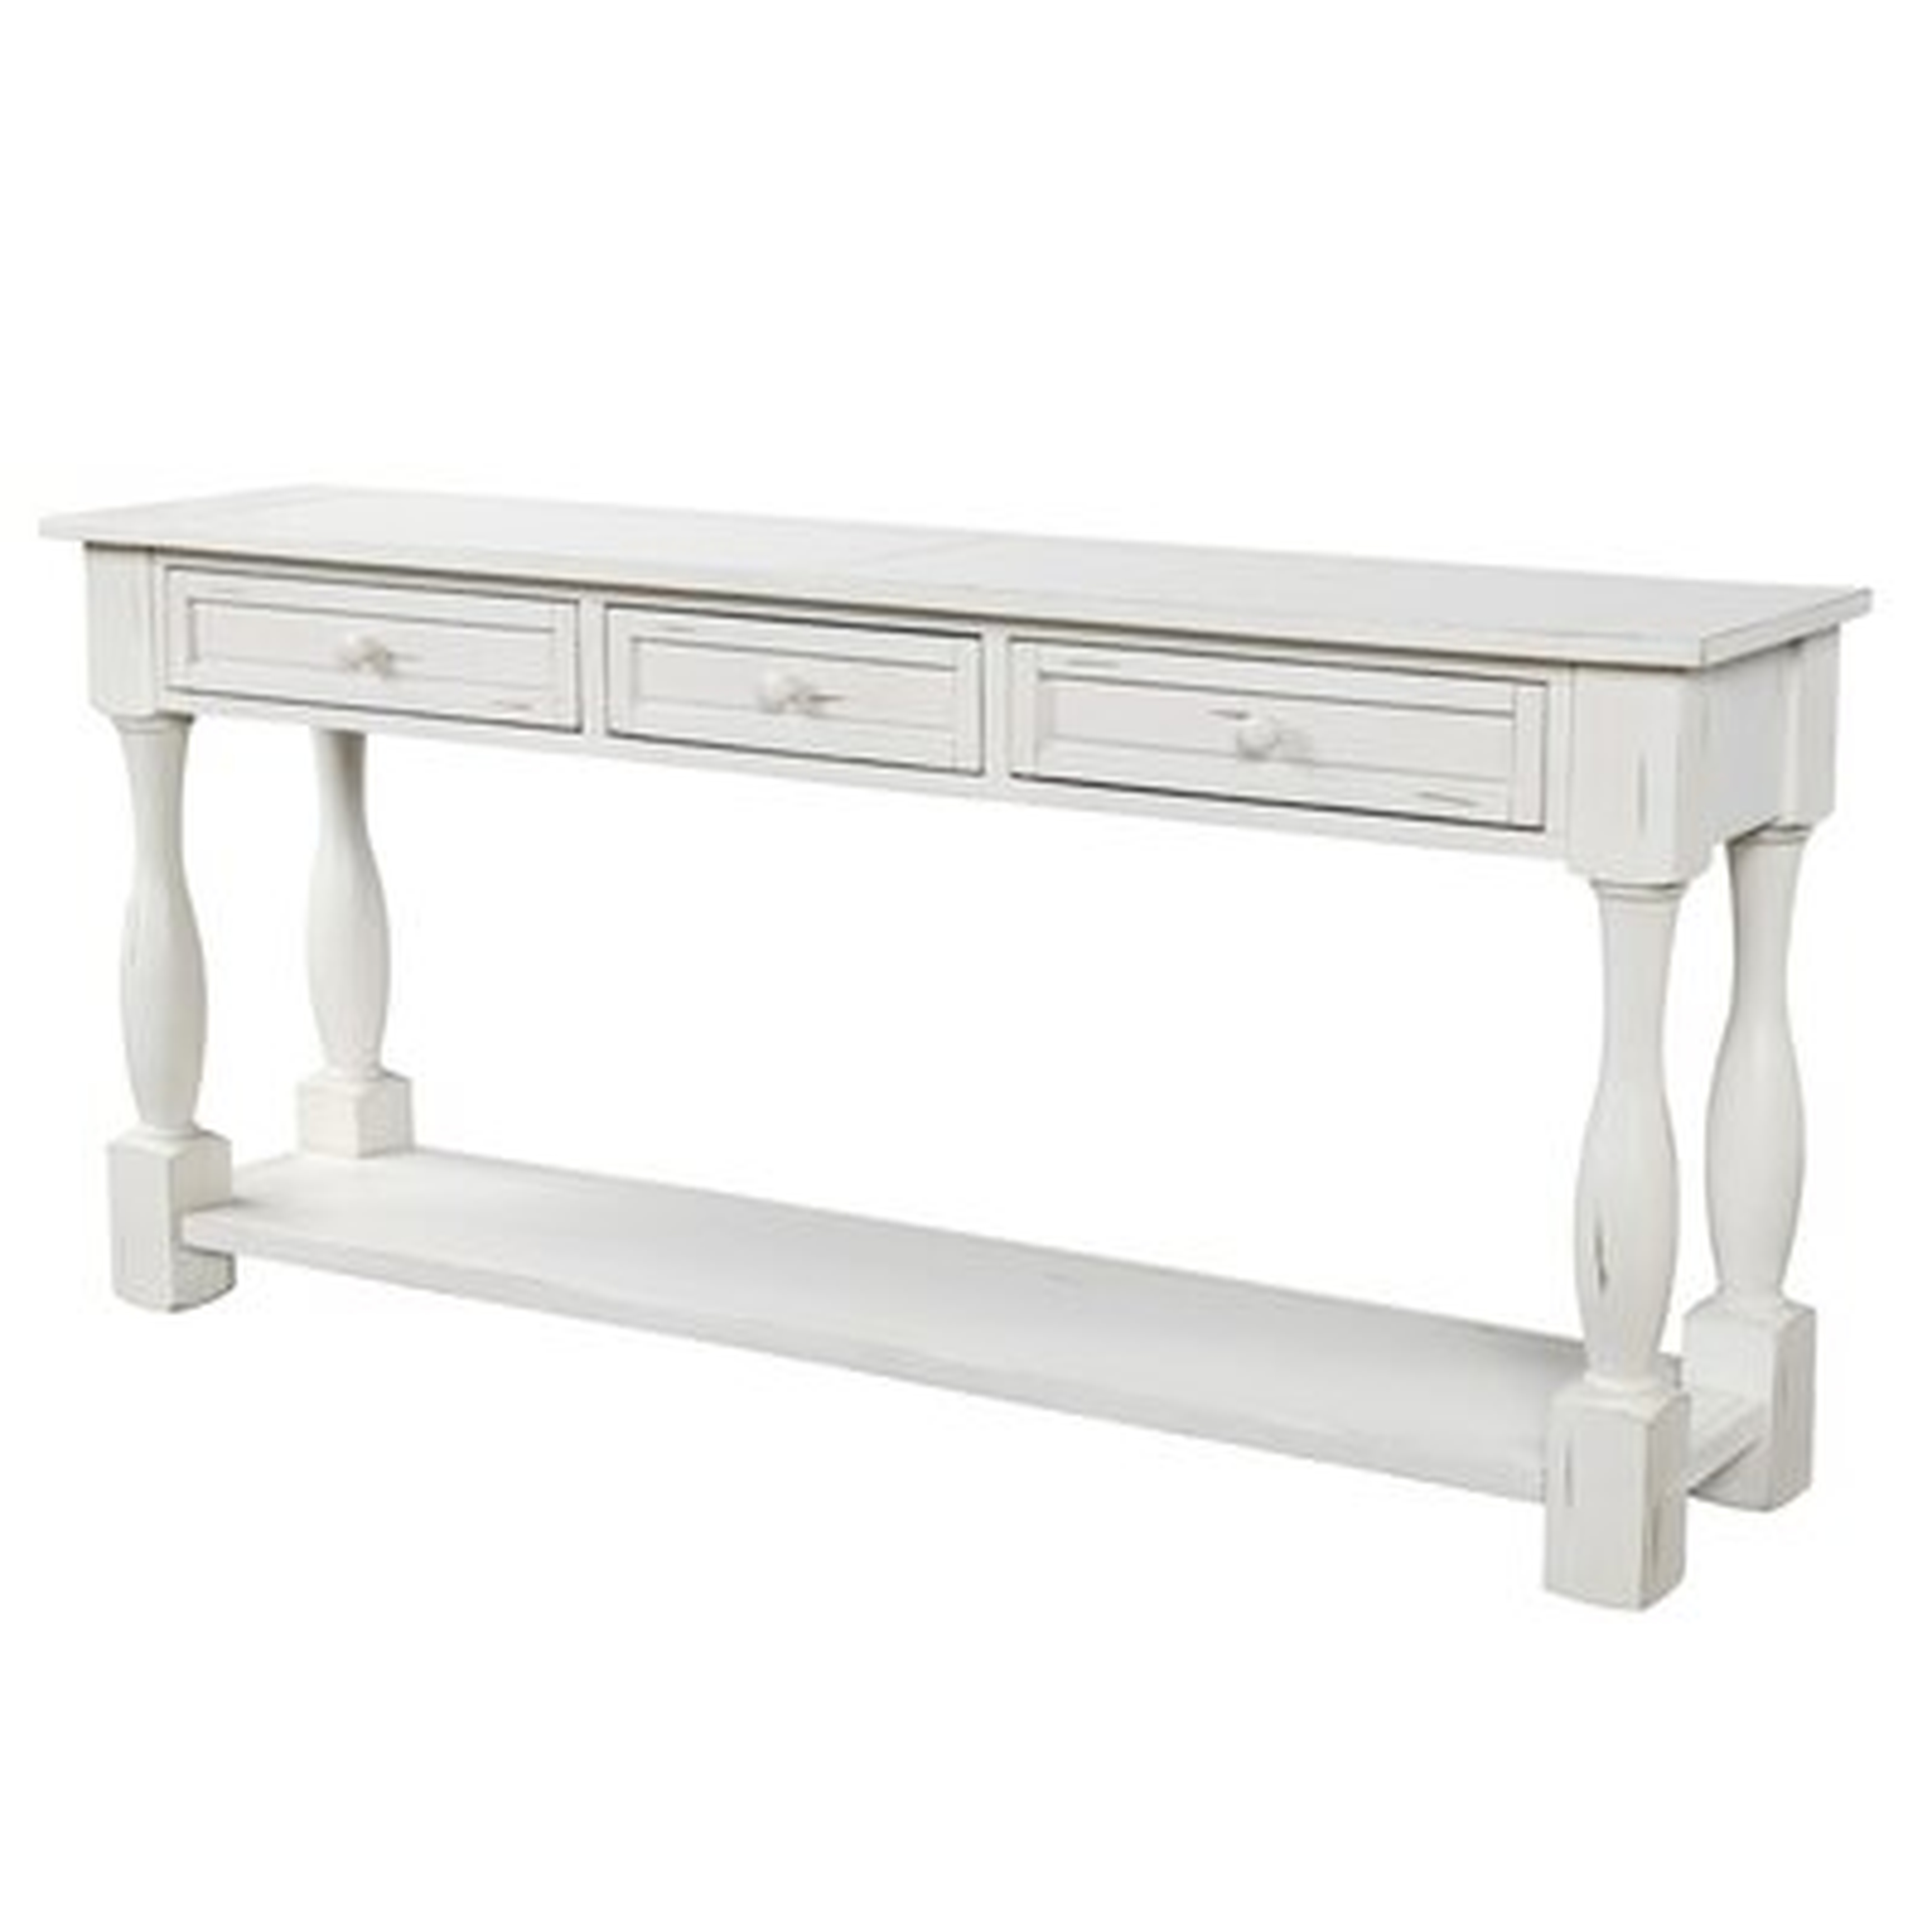 Console Table; Long Sofa Table With Drawers And Shelf - Wayfair